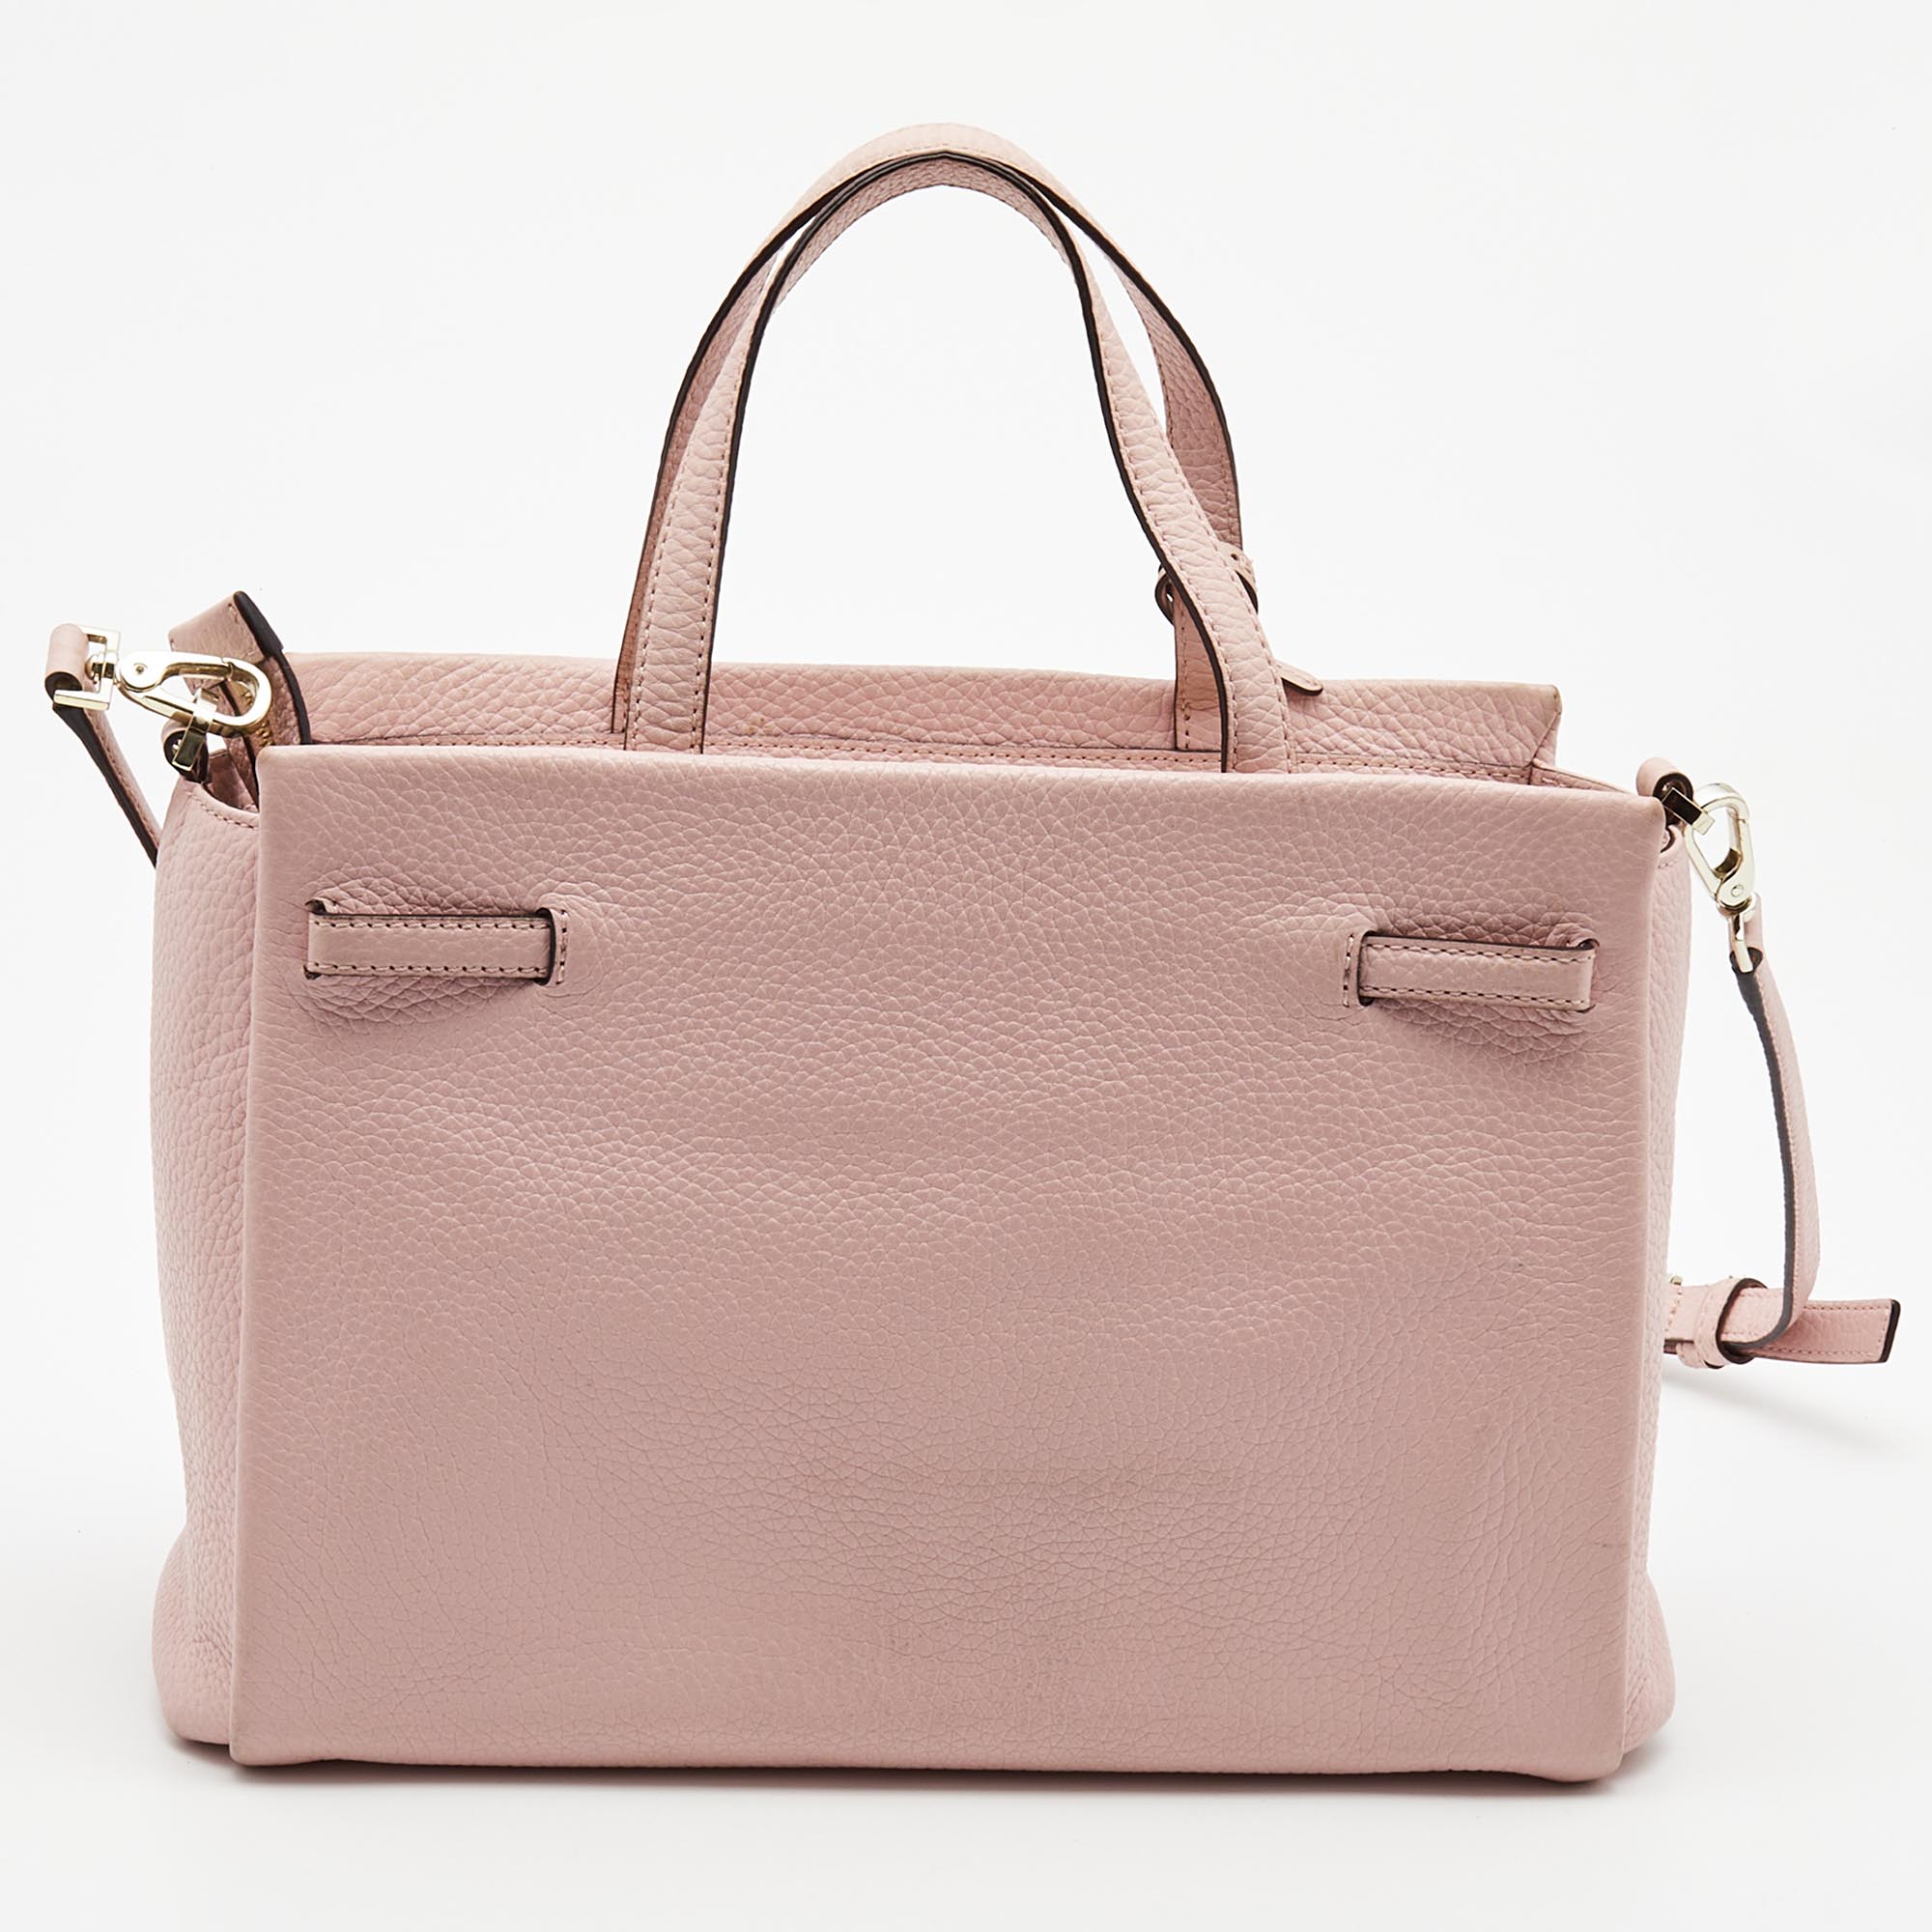 Kate Spade Pink Leather Holden Street Lanie Tote